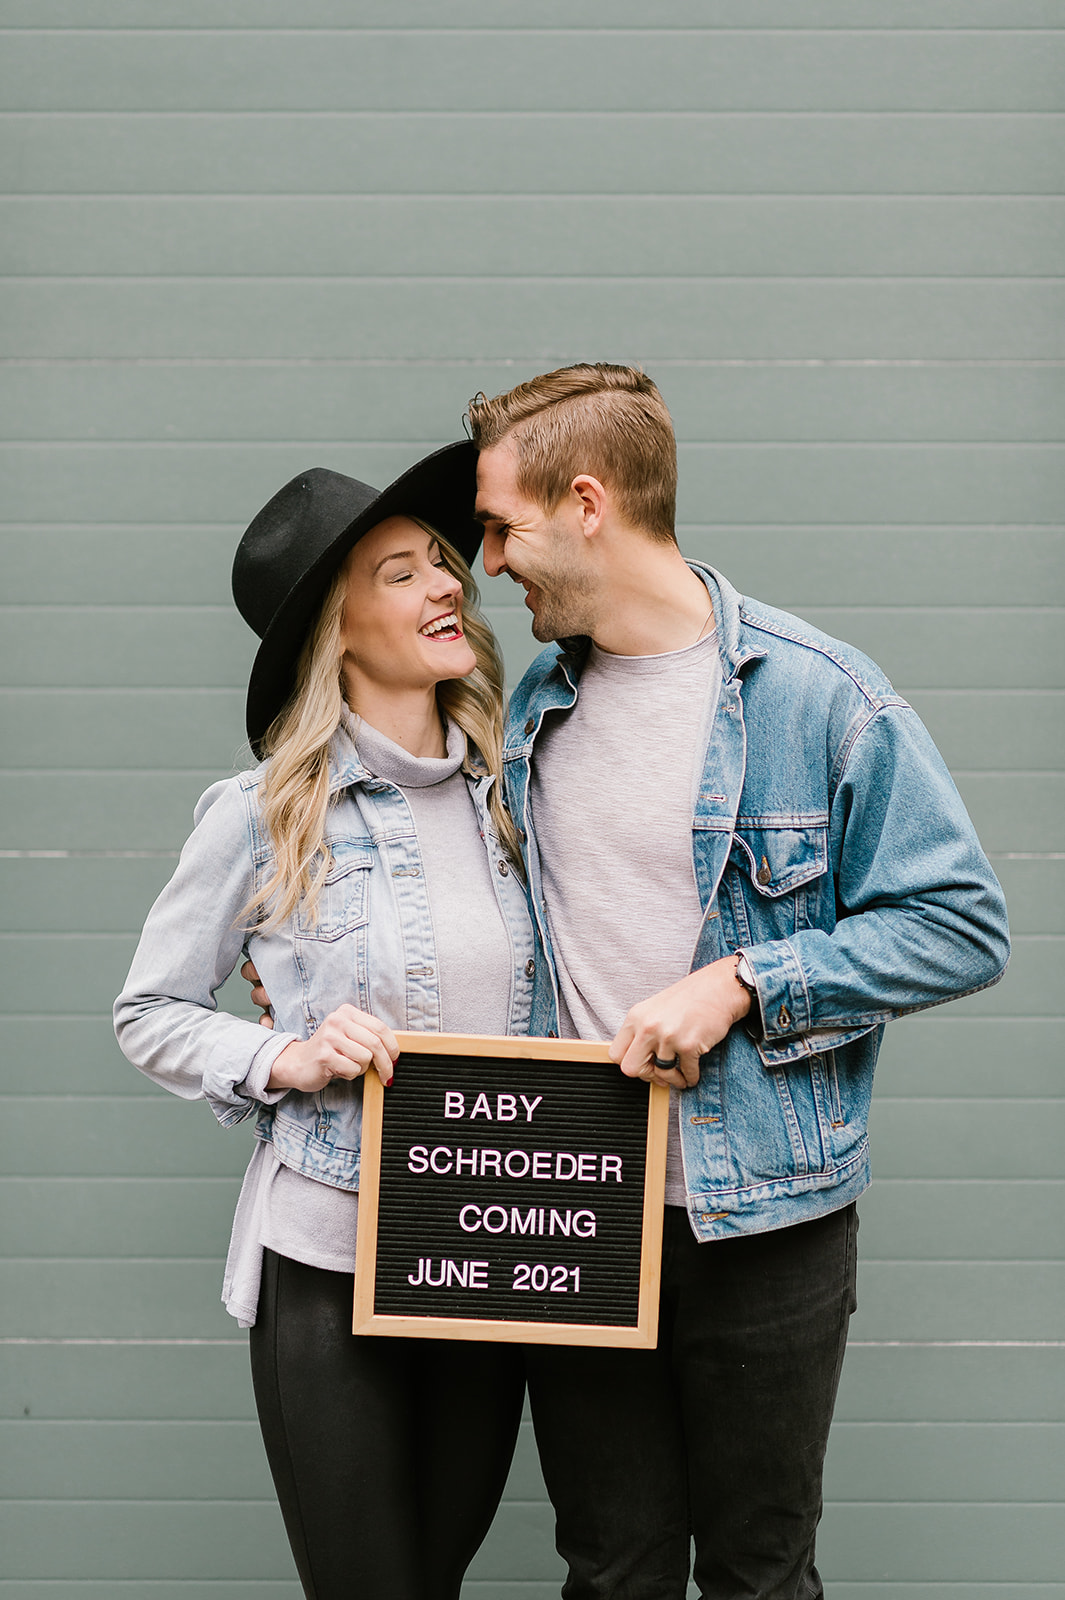 The Day I Found Out I was Pregnant & How I Told my Husband | Miranda Schroeder Blog

www.mirandaschroeder.com